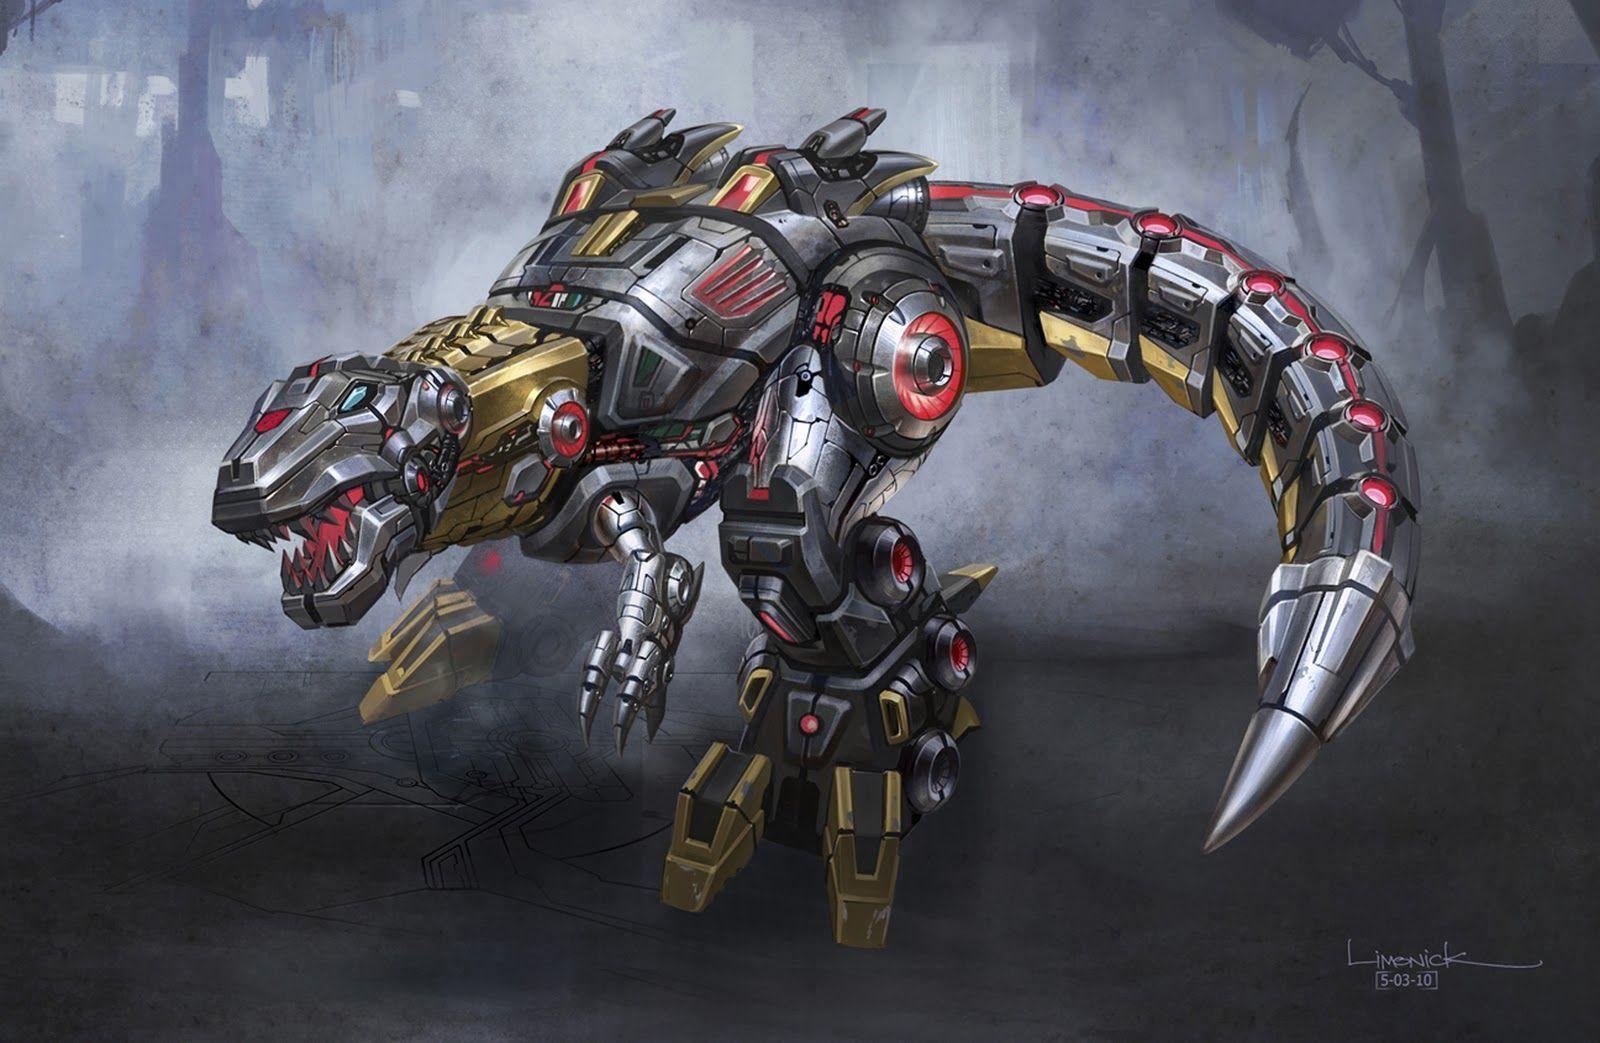 image For > Fall Of Cybertron Dinobots